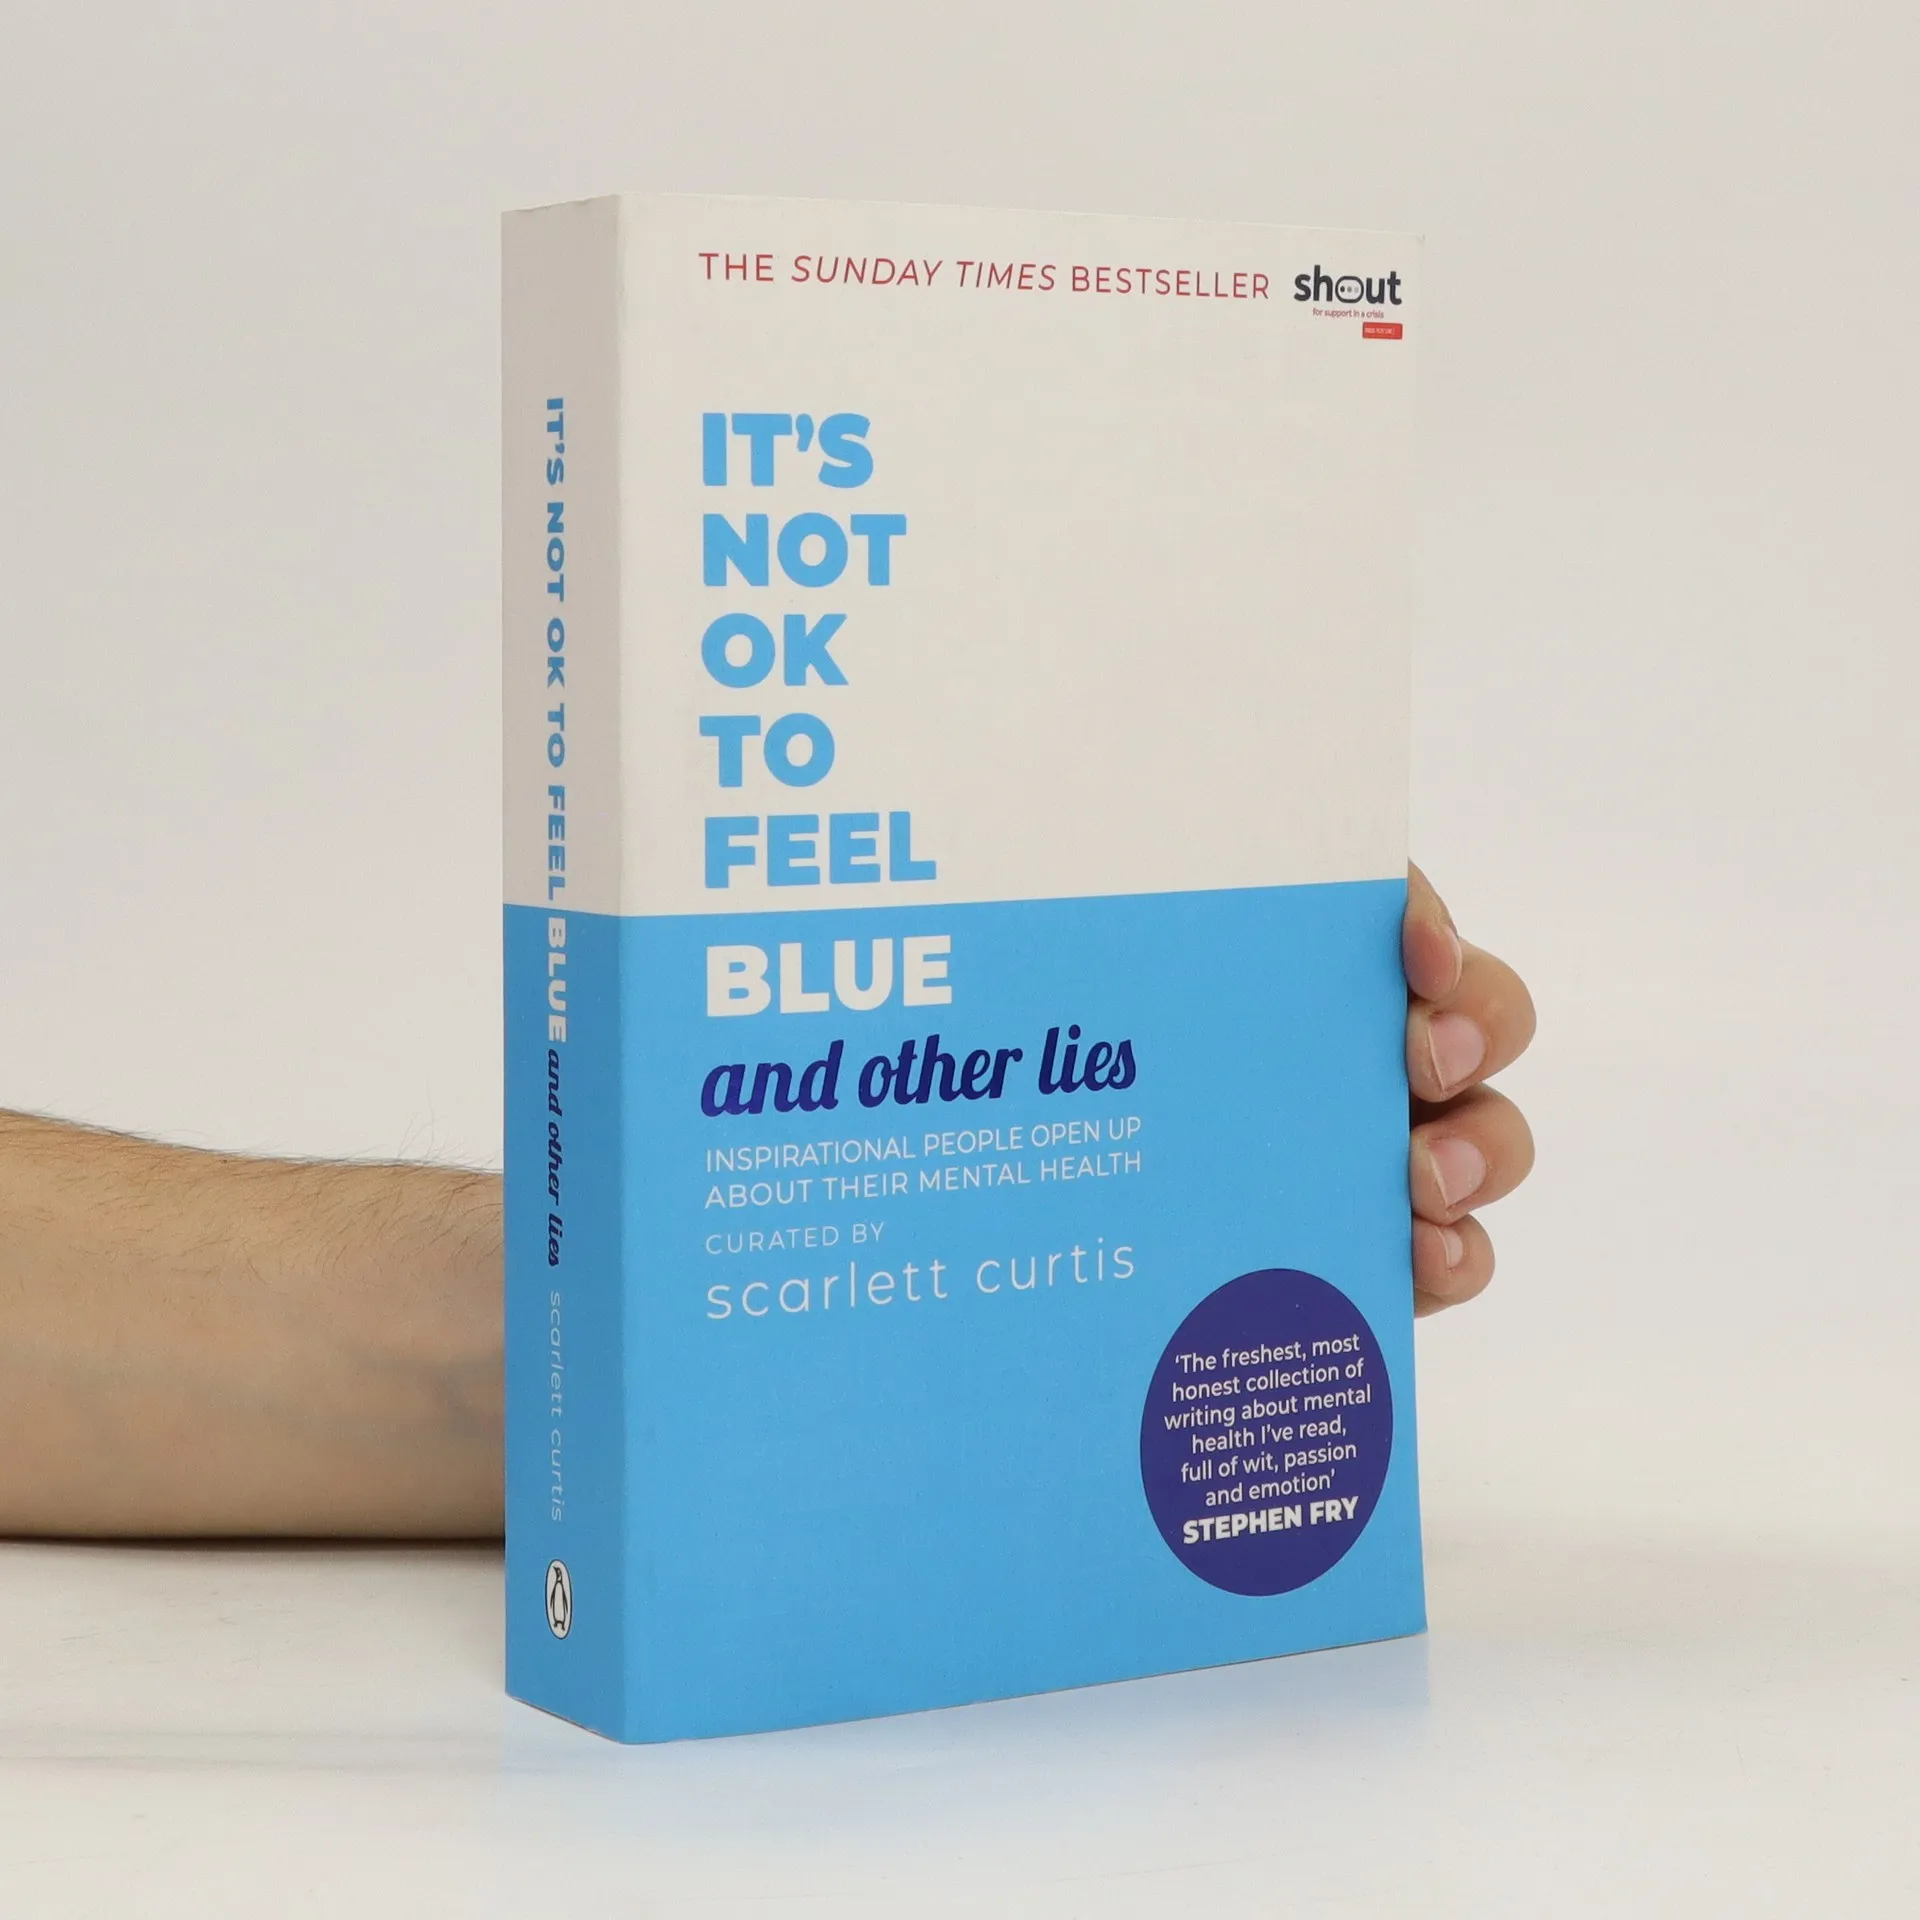 It's Not OK to Feel Blue [and other lies] by Scarlett Curtis